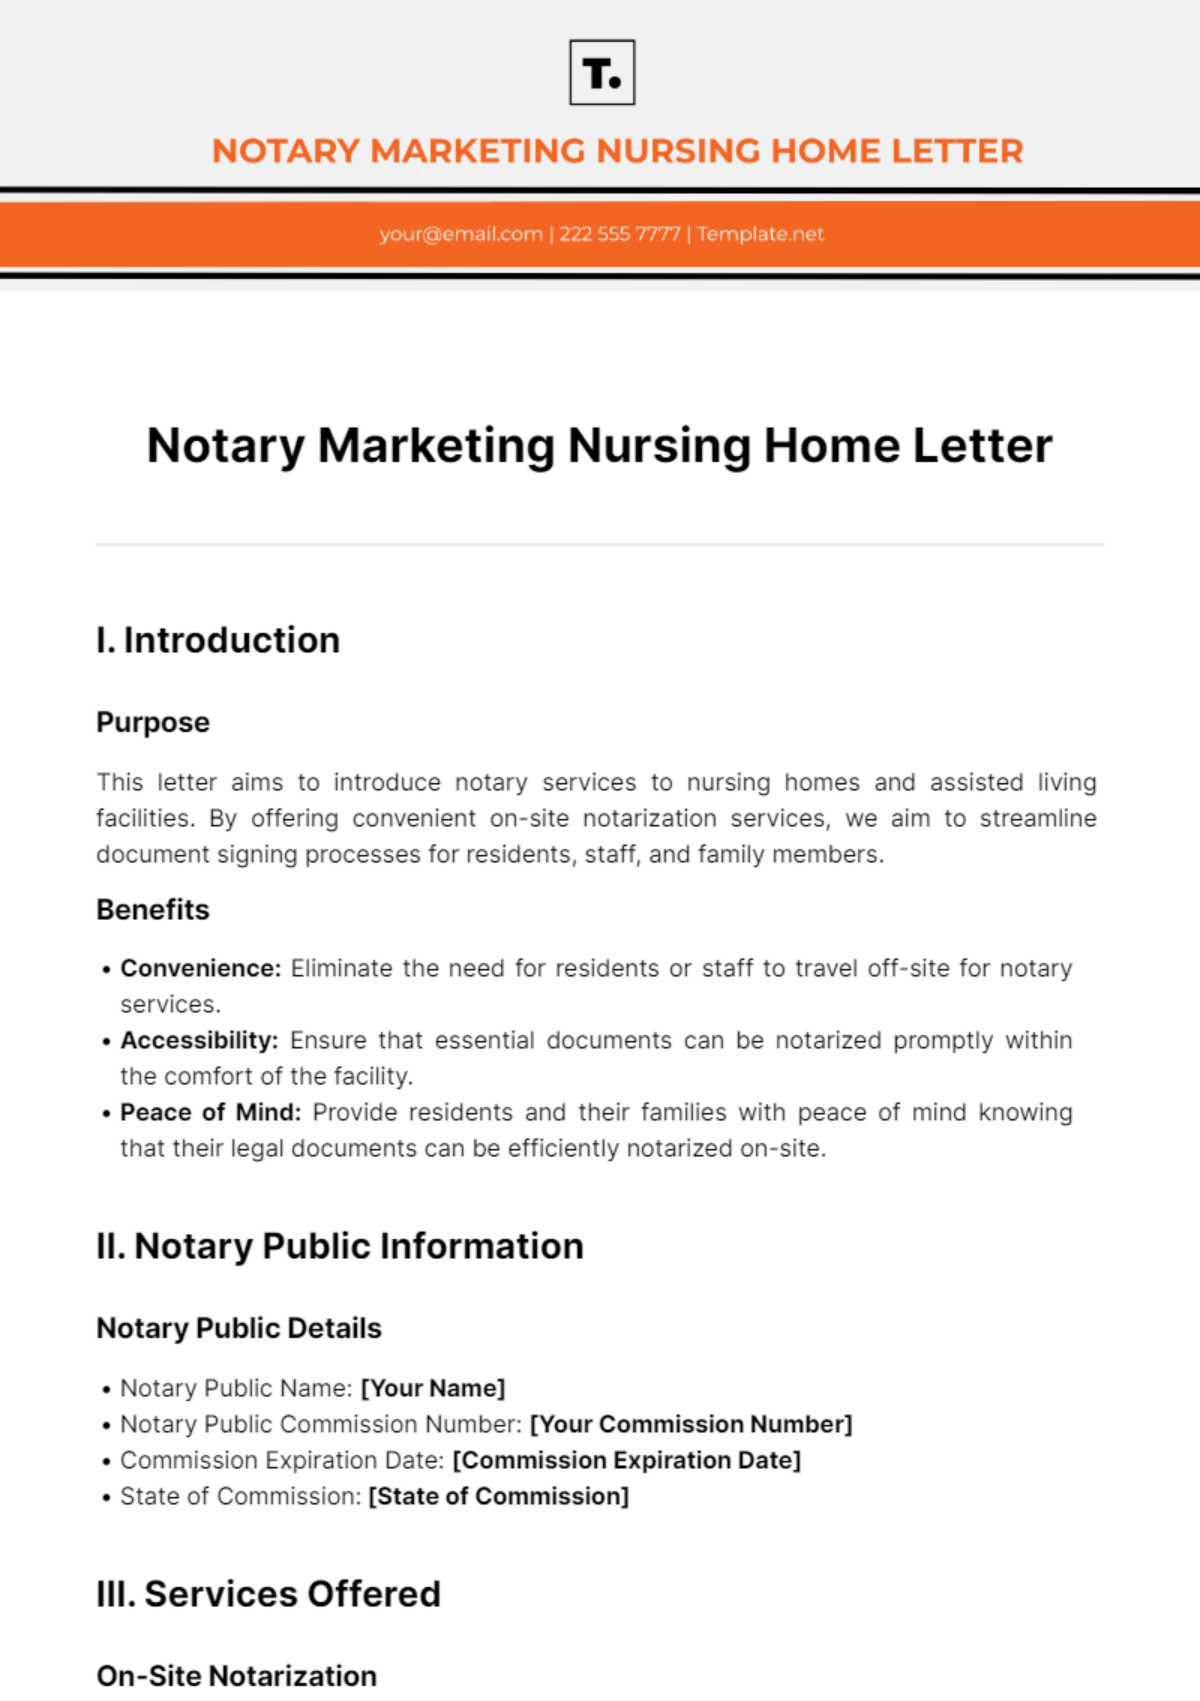 Notary Marketing Nursing Home Letter Template